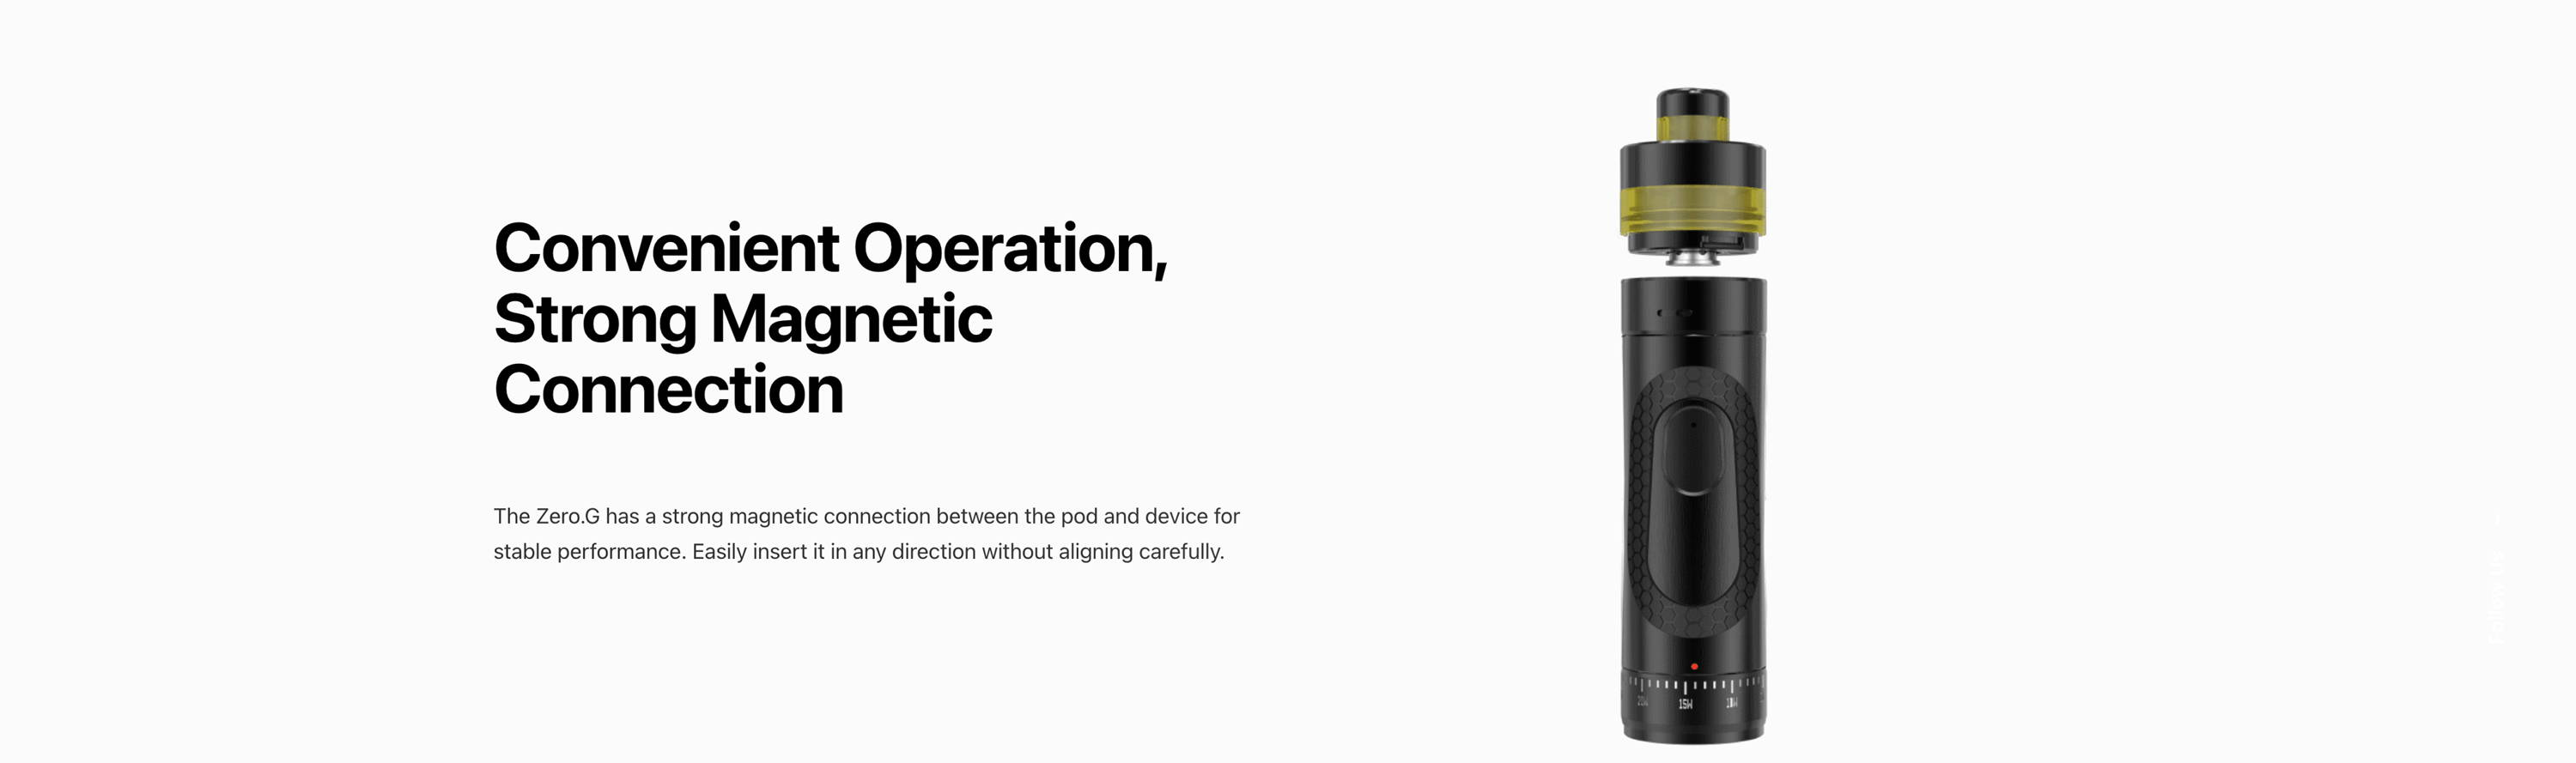 Convenient Operation, Strong Magnetic Connection  The Zero.G has a strong magnetic connection between the pod and device for stable performance. Easily insert it in any direction without aligning carefully.